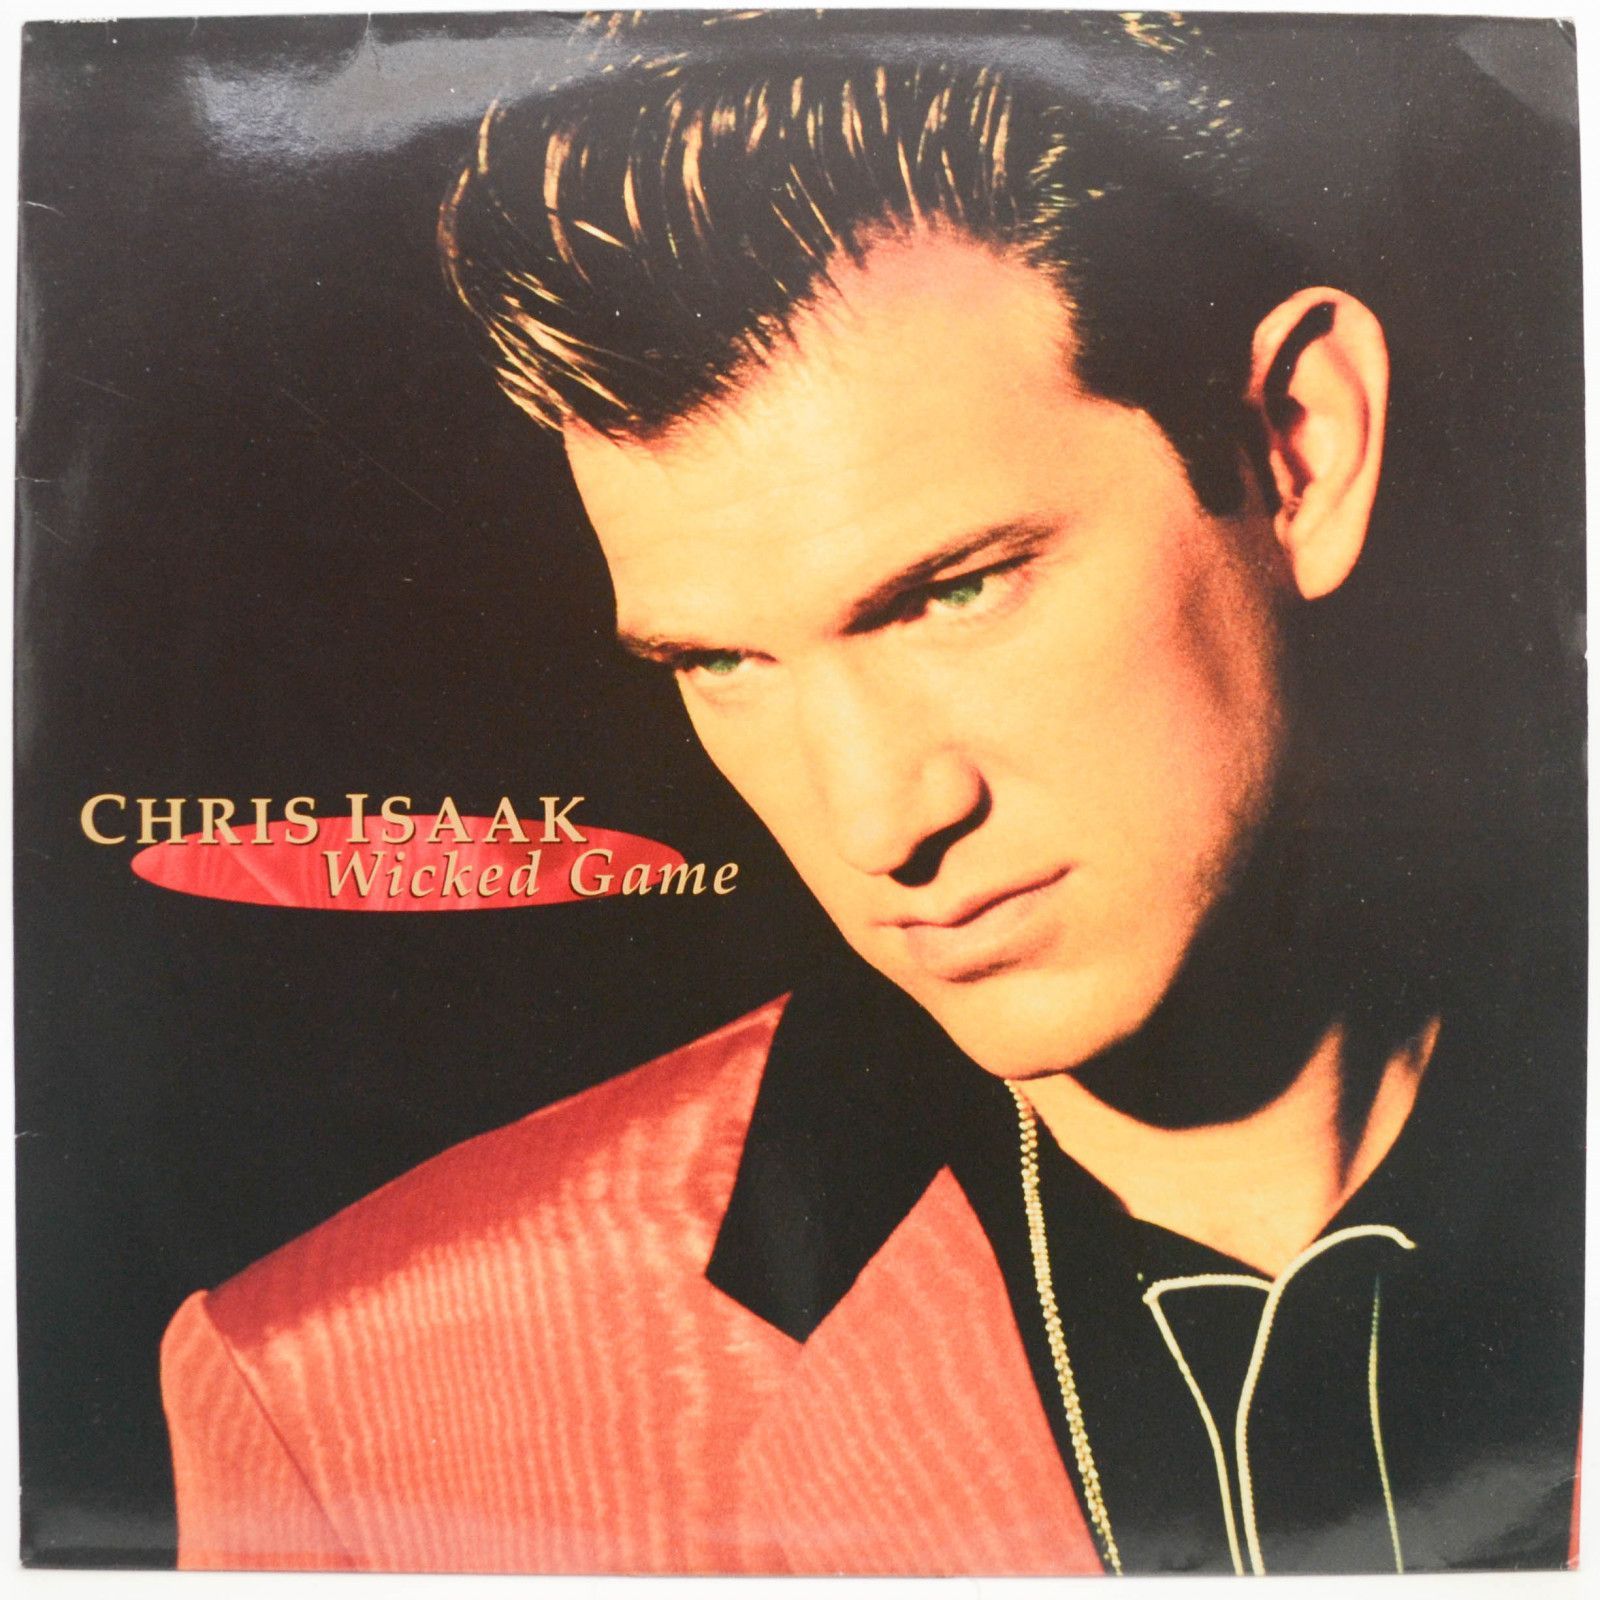 Chris Isaak — Wicked Game, 1991